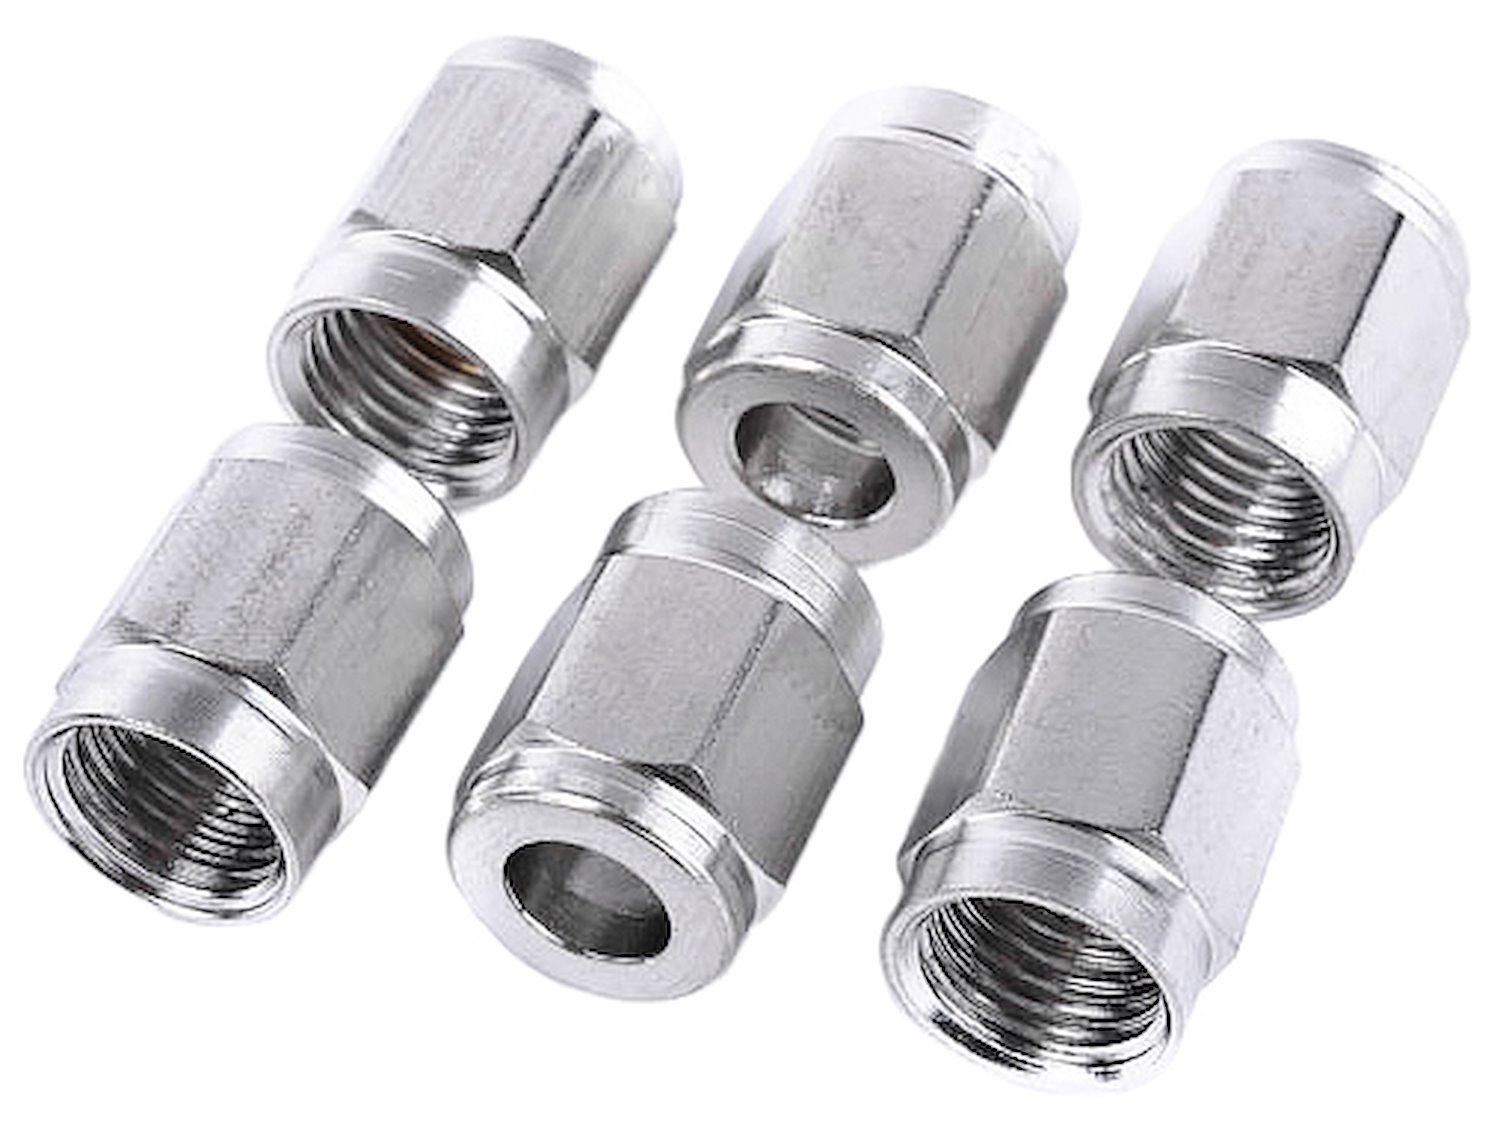 Tube Nuts [-3 AN, Stainless Steel]